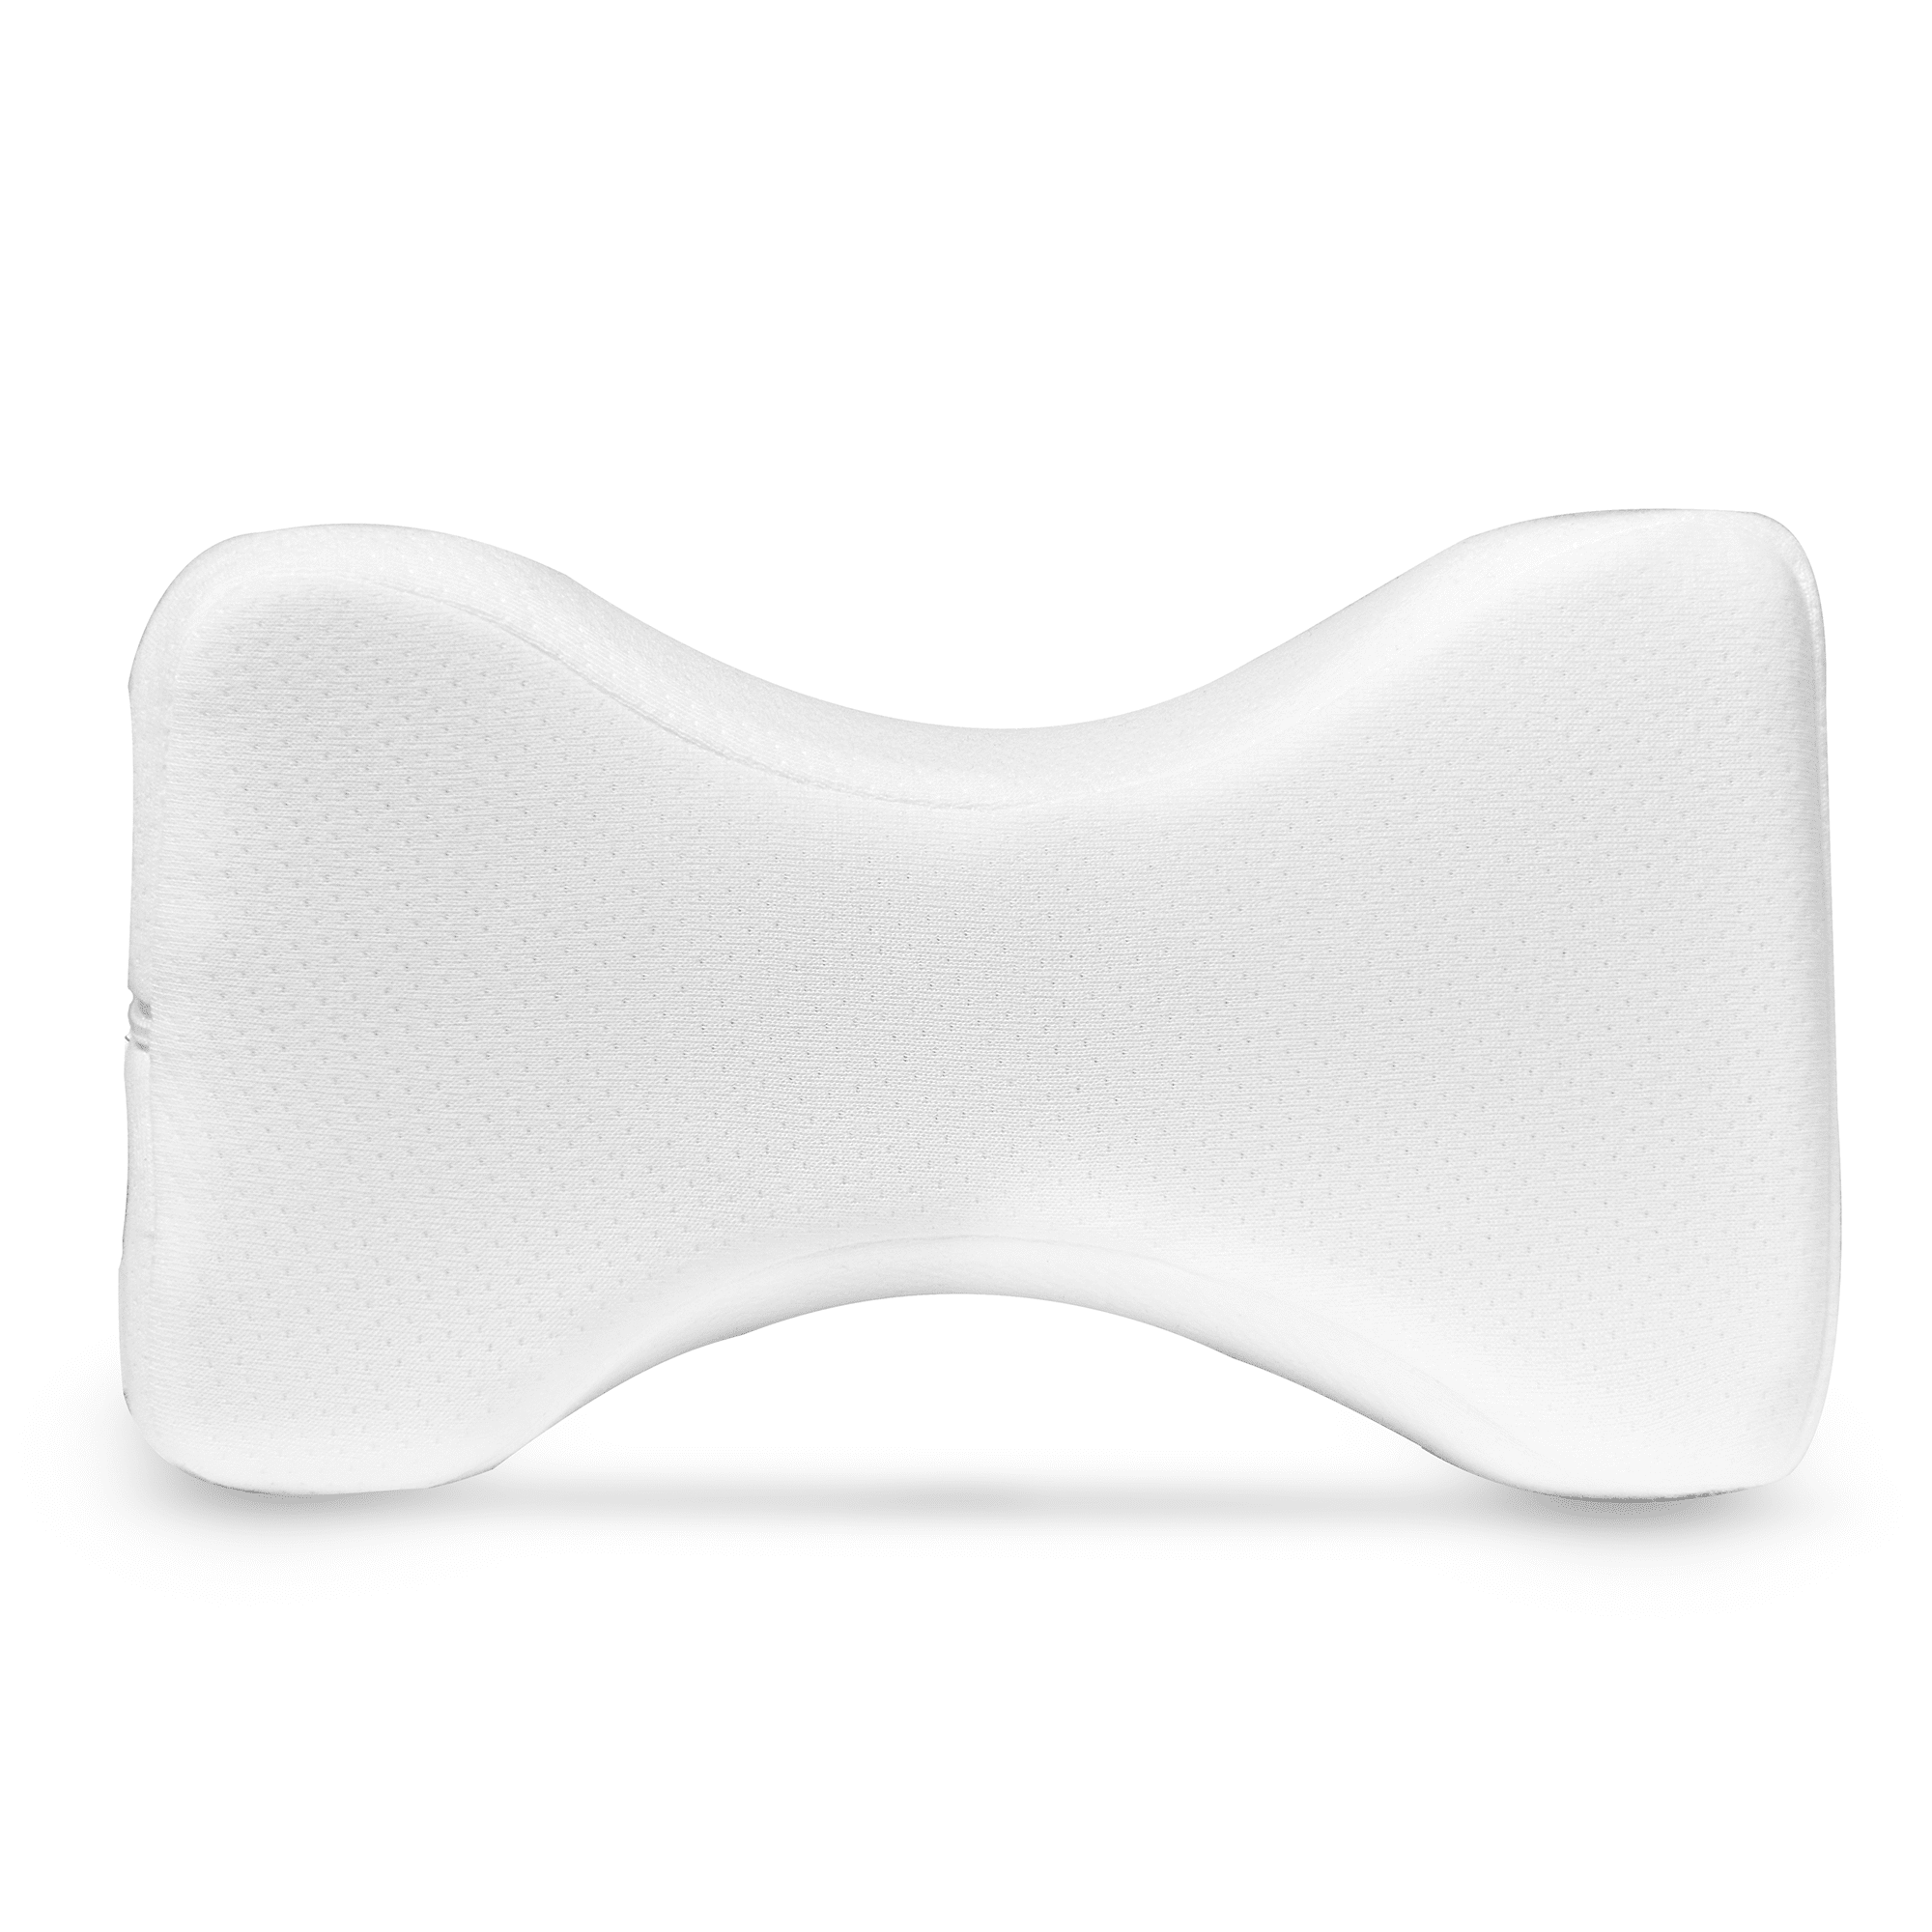 Luna Orthopedic Knee Pillow for Sciatica Relief, Back Pain, Leg Pain, Pregnancy, Hip and Joint Pain | Memory Foam Wedge